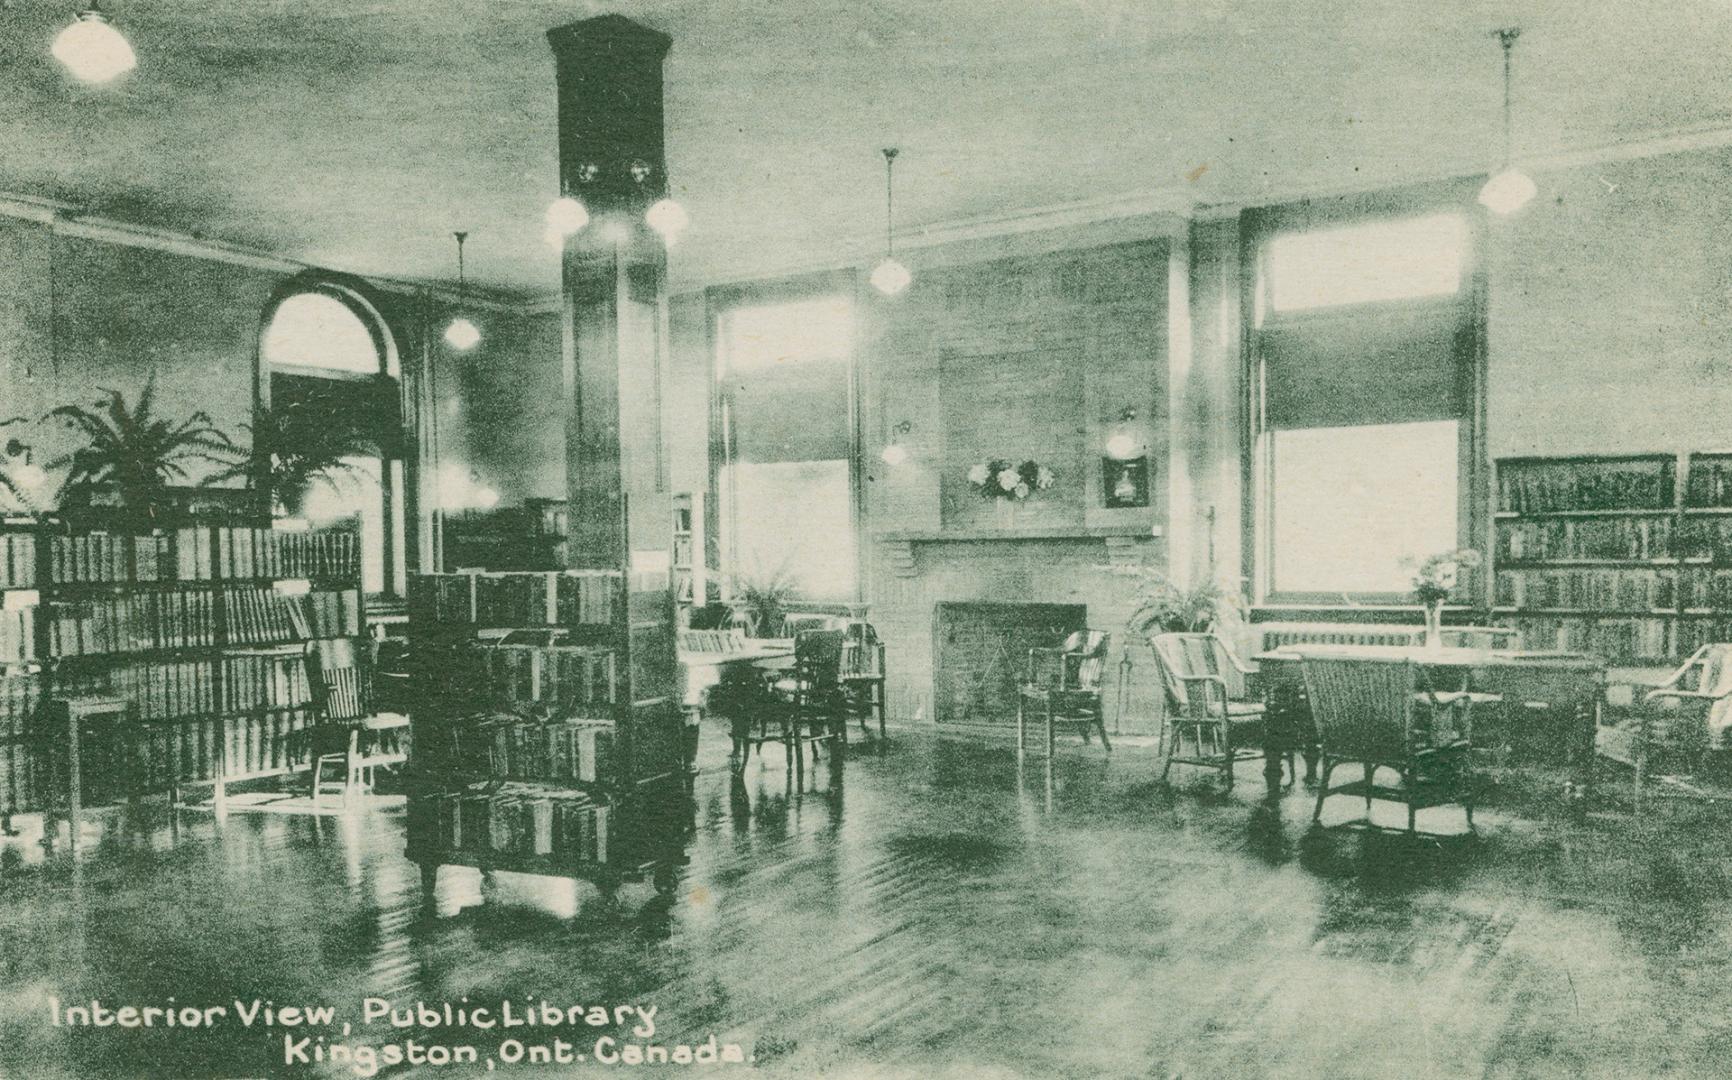 Picture of room in a library with tables, books and fireplace. 